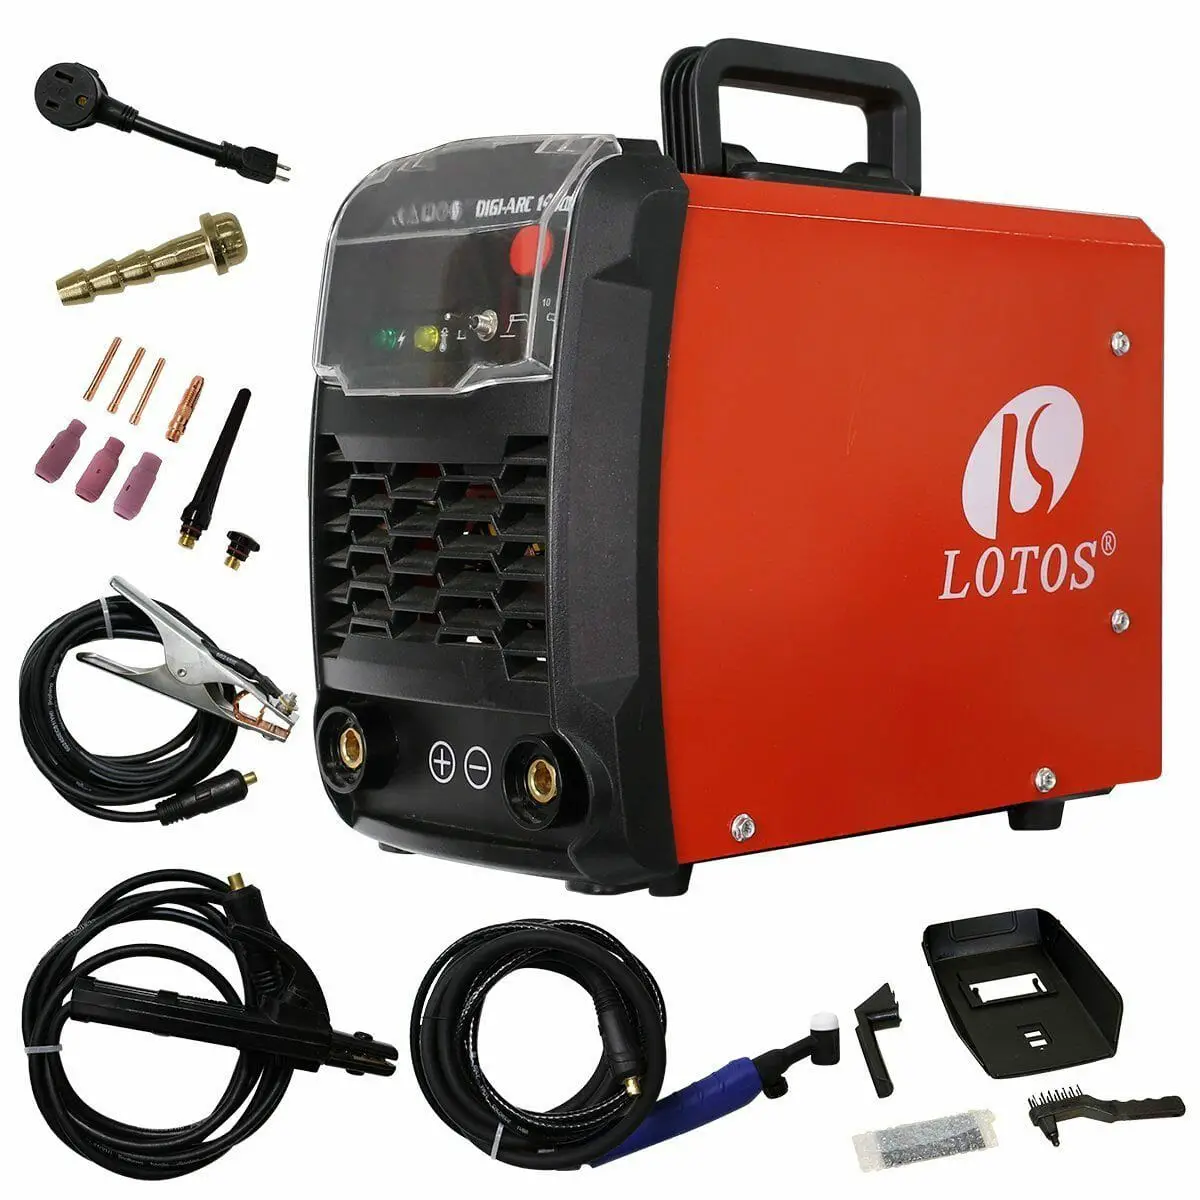 LOTOS Technology TIG140 Review